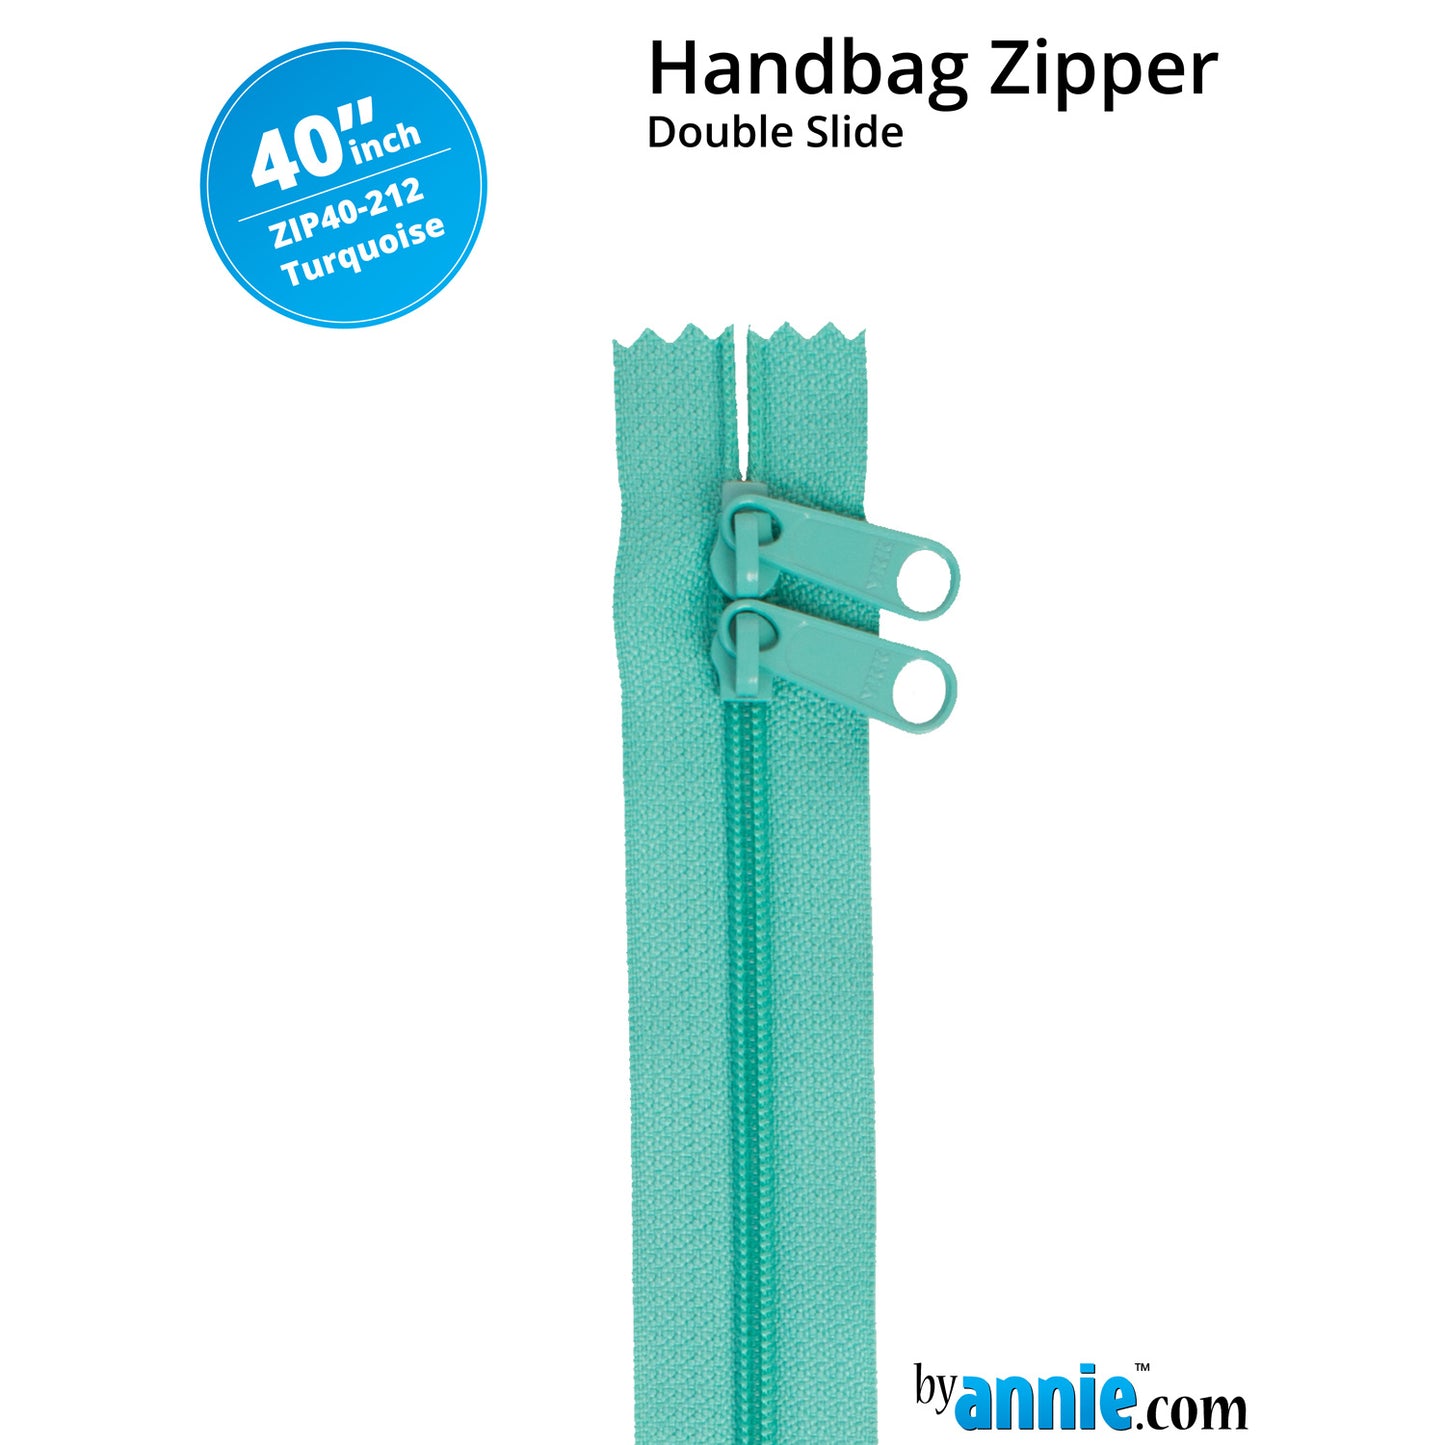 ByAnnie 40" Double Slide Zipper - Turquoise Primary Image